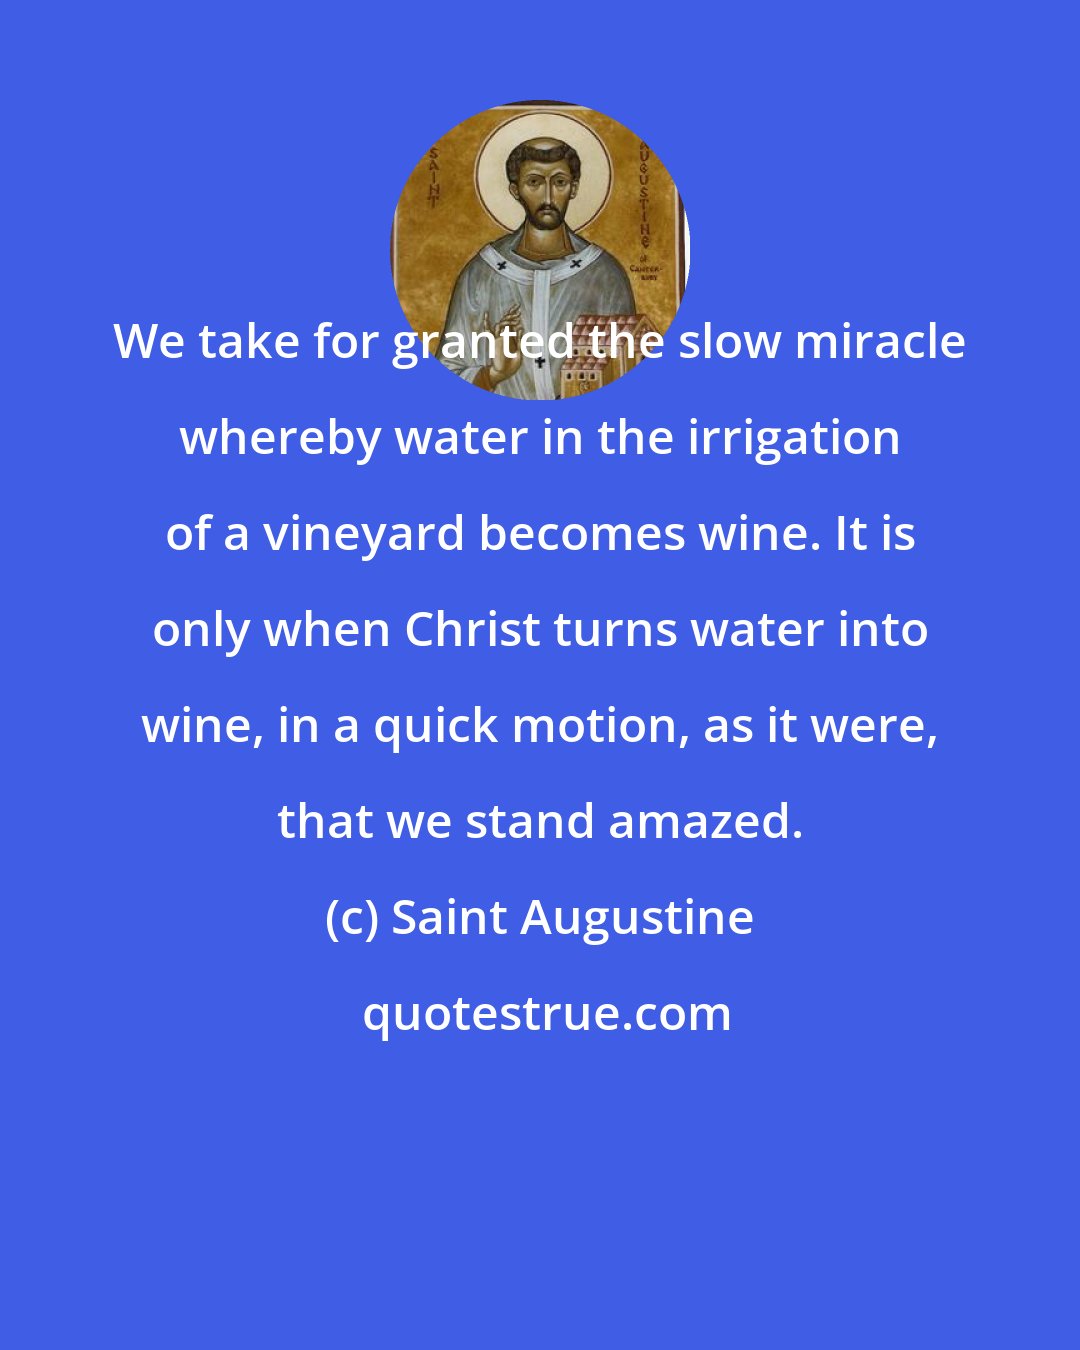 Saint Augustine: We take for granted the slow miracle whereby water in the irrigation of a vineyard becomes wine. It is only when Christ turns water into wine, in a quick motion, as it were, that we stand amazed.